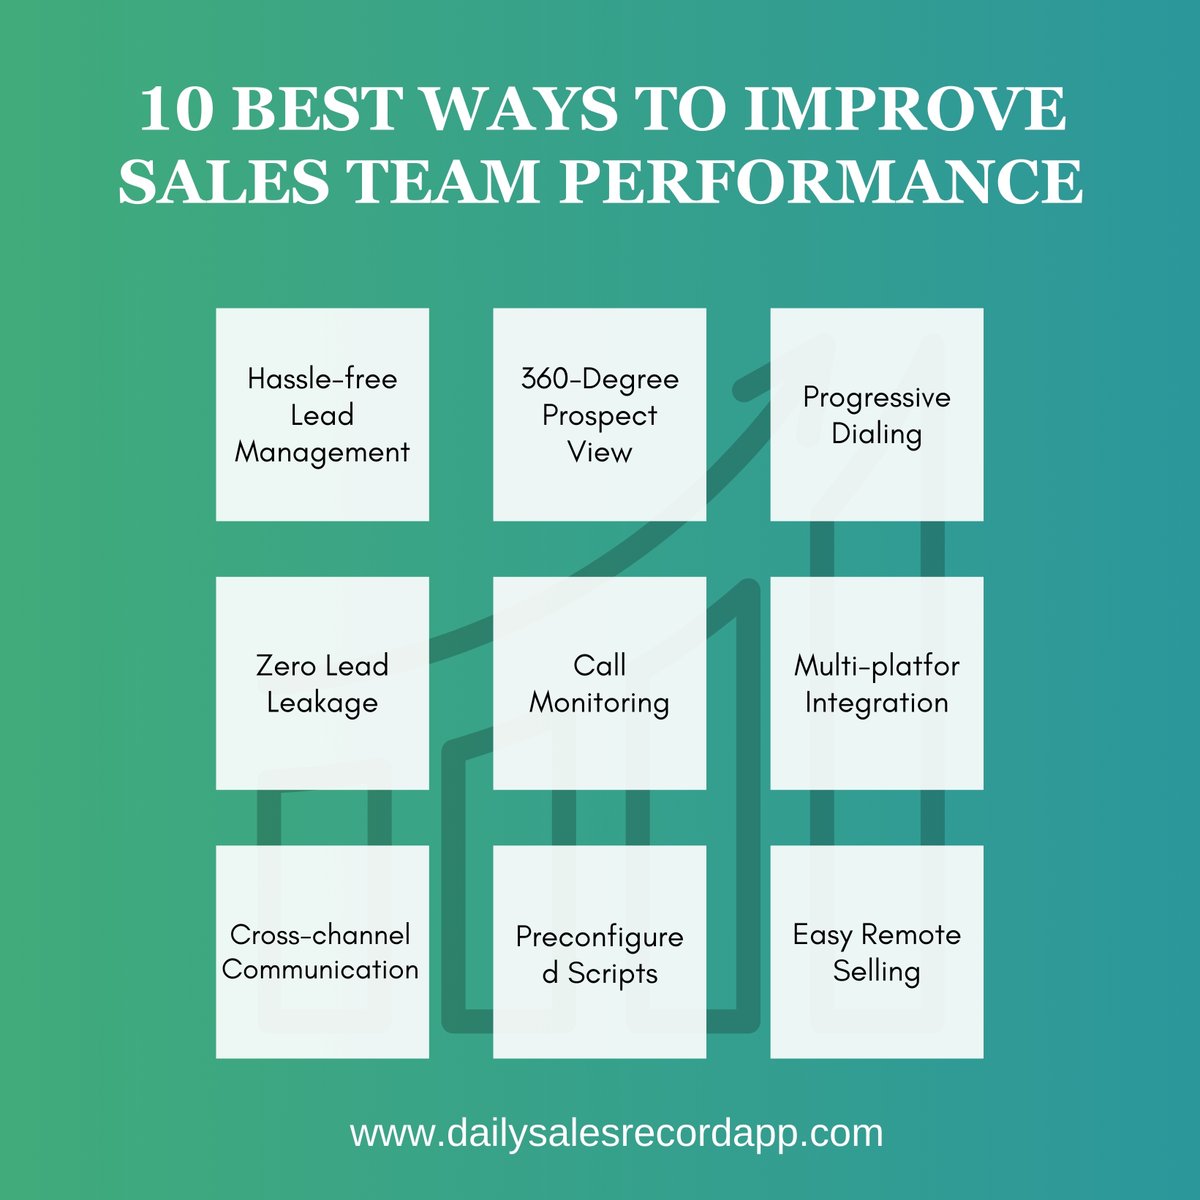 Sales is the ultimate way your business can sustain its growth. Your revenue depends on your sales team and sales team performance. The quickest way to generate more revenue is to improve your sales performance.

#sales #salesperformance #revenuegrowth #businesssuccess #salesteam